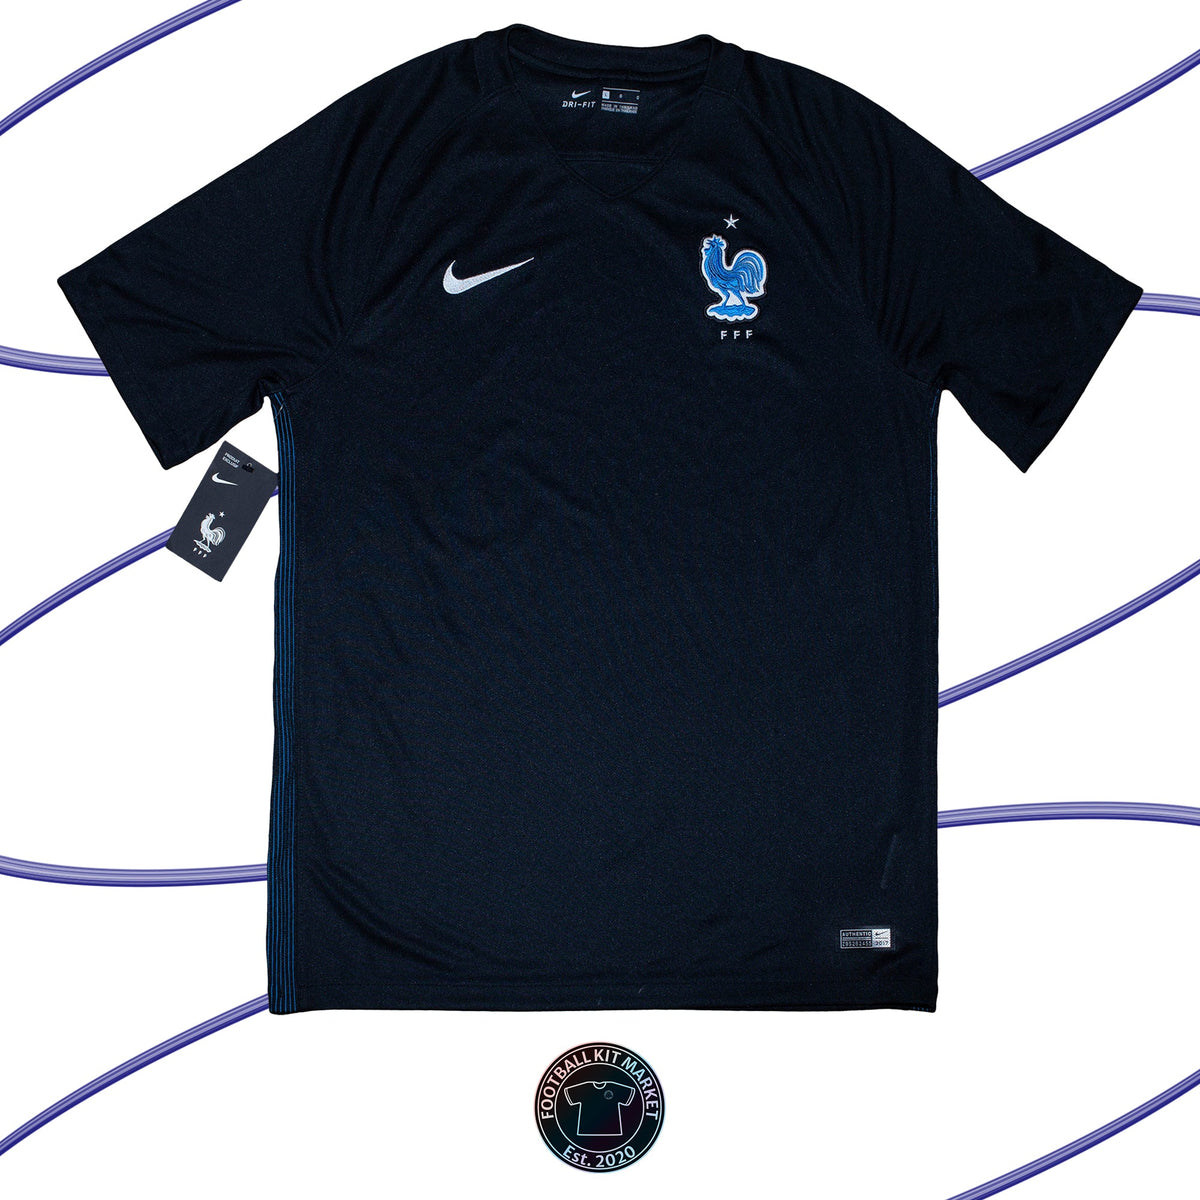 Genuine FRANCE 3rd Shirt (2016-2017) - NIKE (L) - Product Image from Football Kit Market